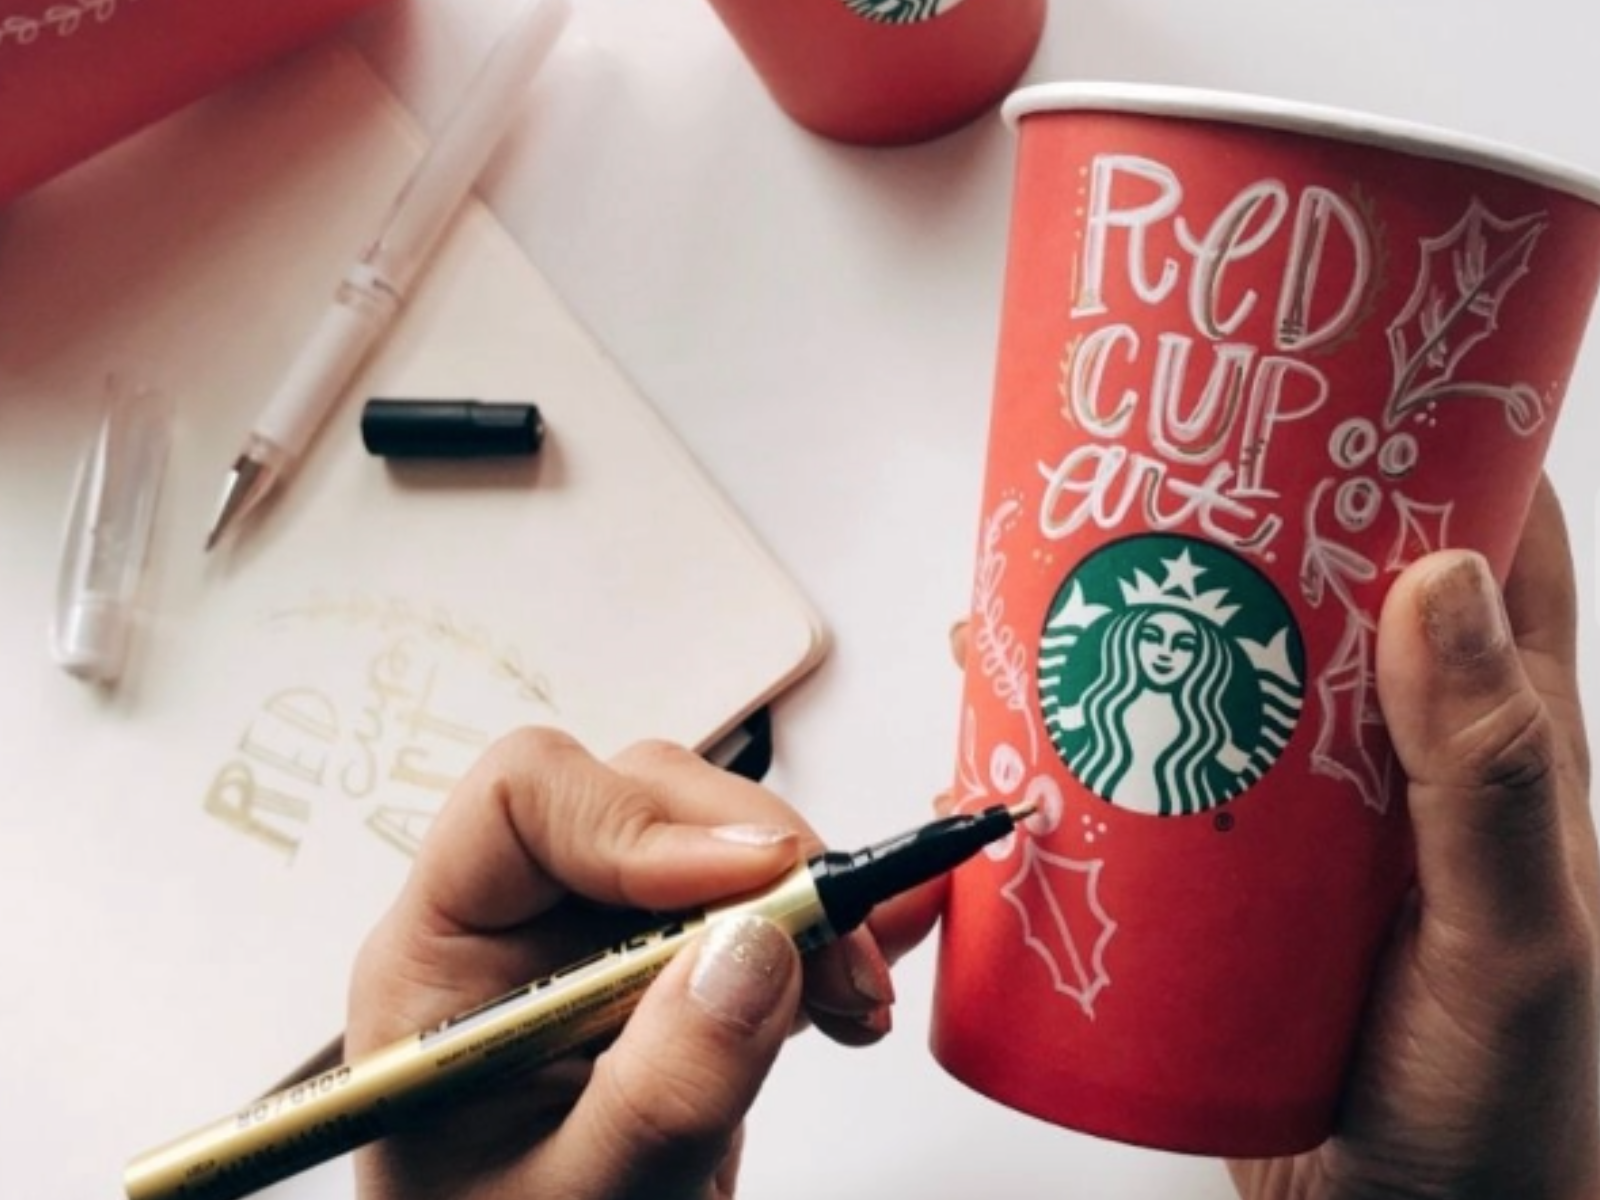 starbucks cup being drawn on